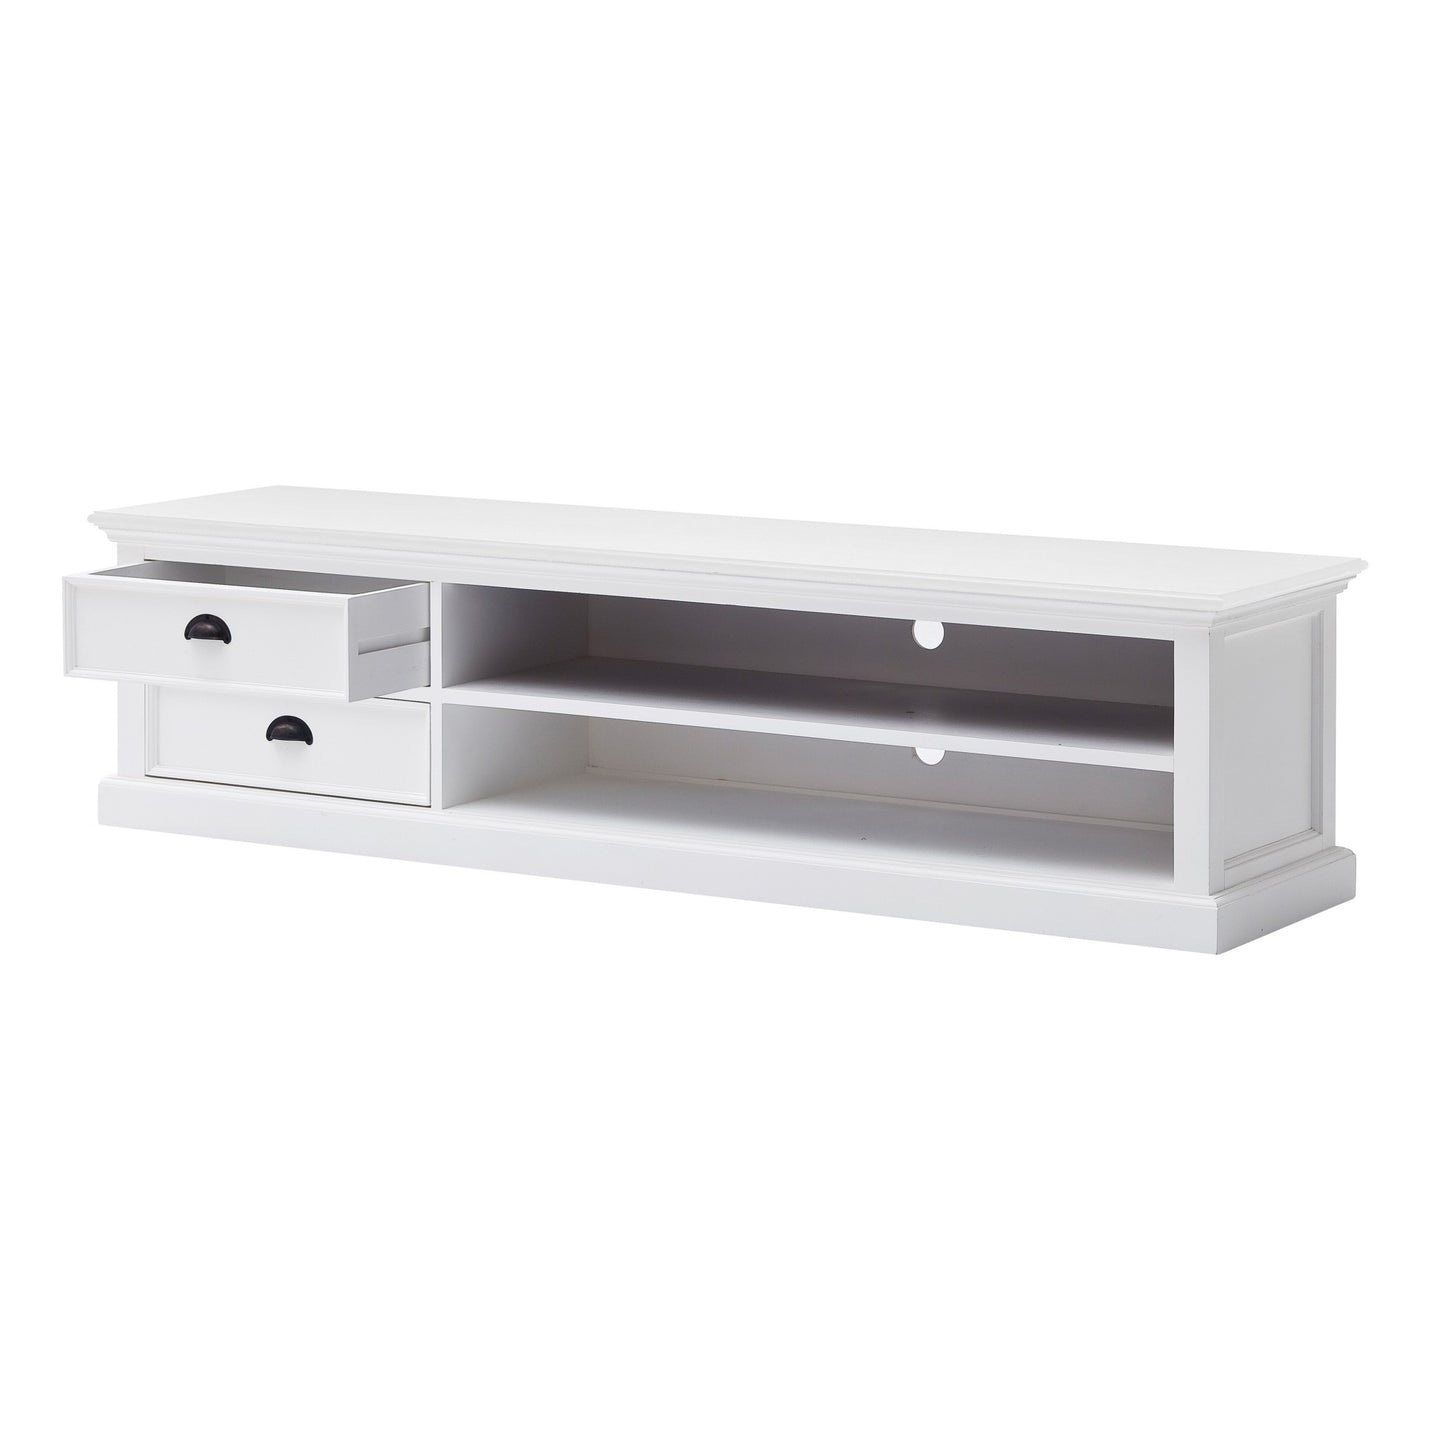 71" Classic White Entertainment Unit with Two Drawers By Homeroots